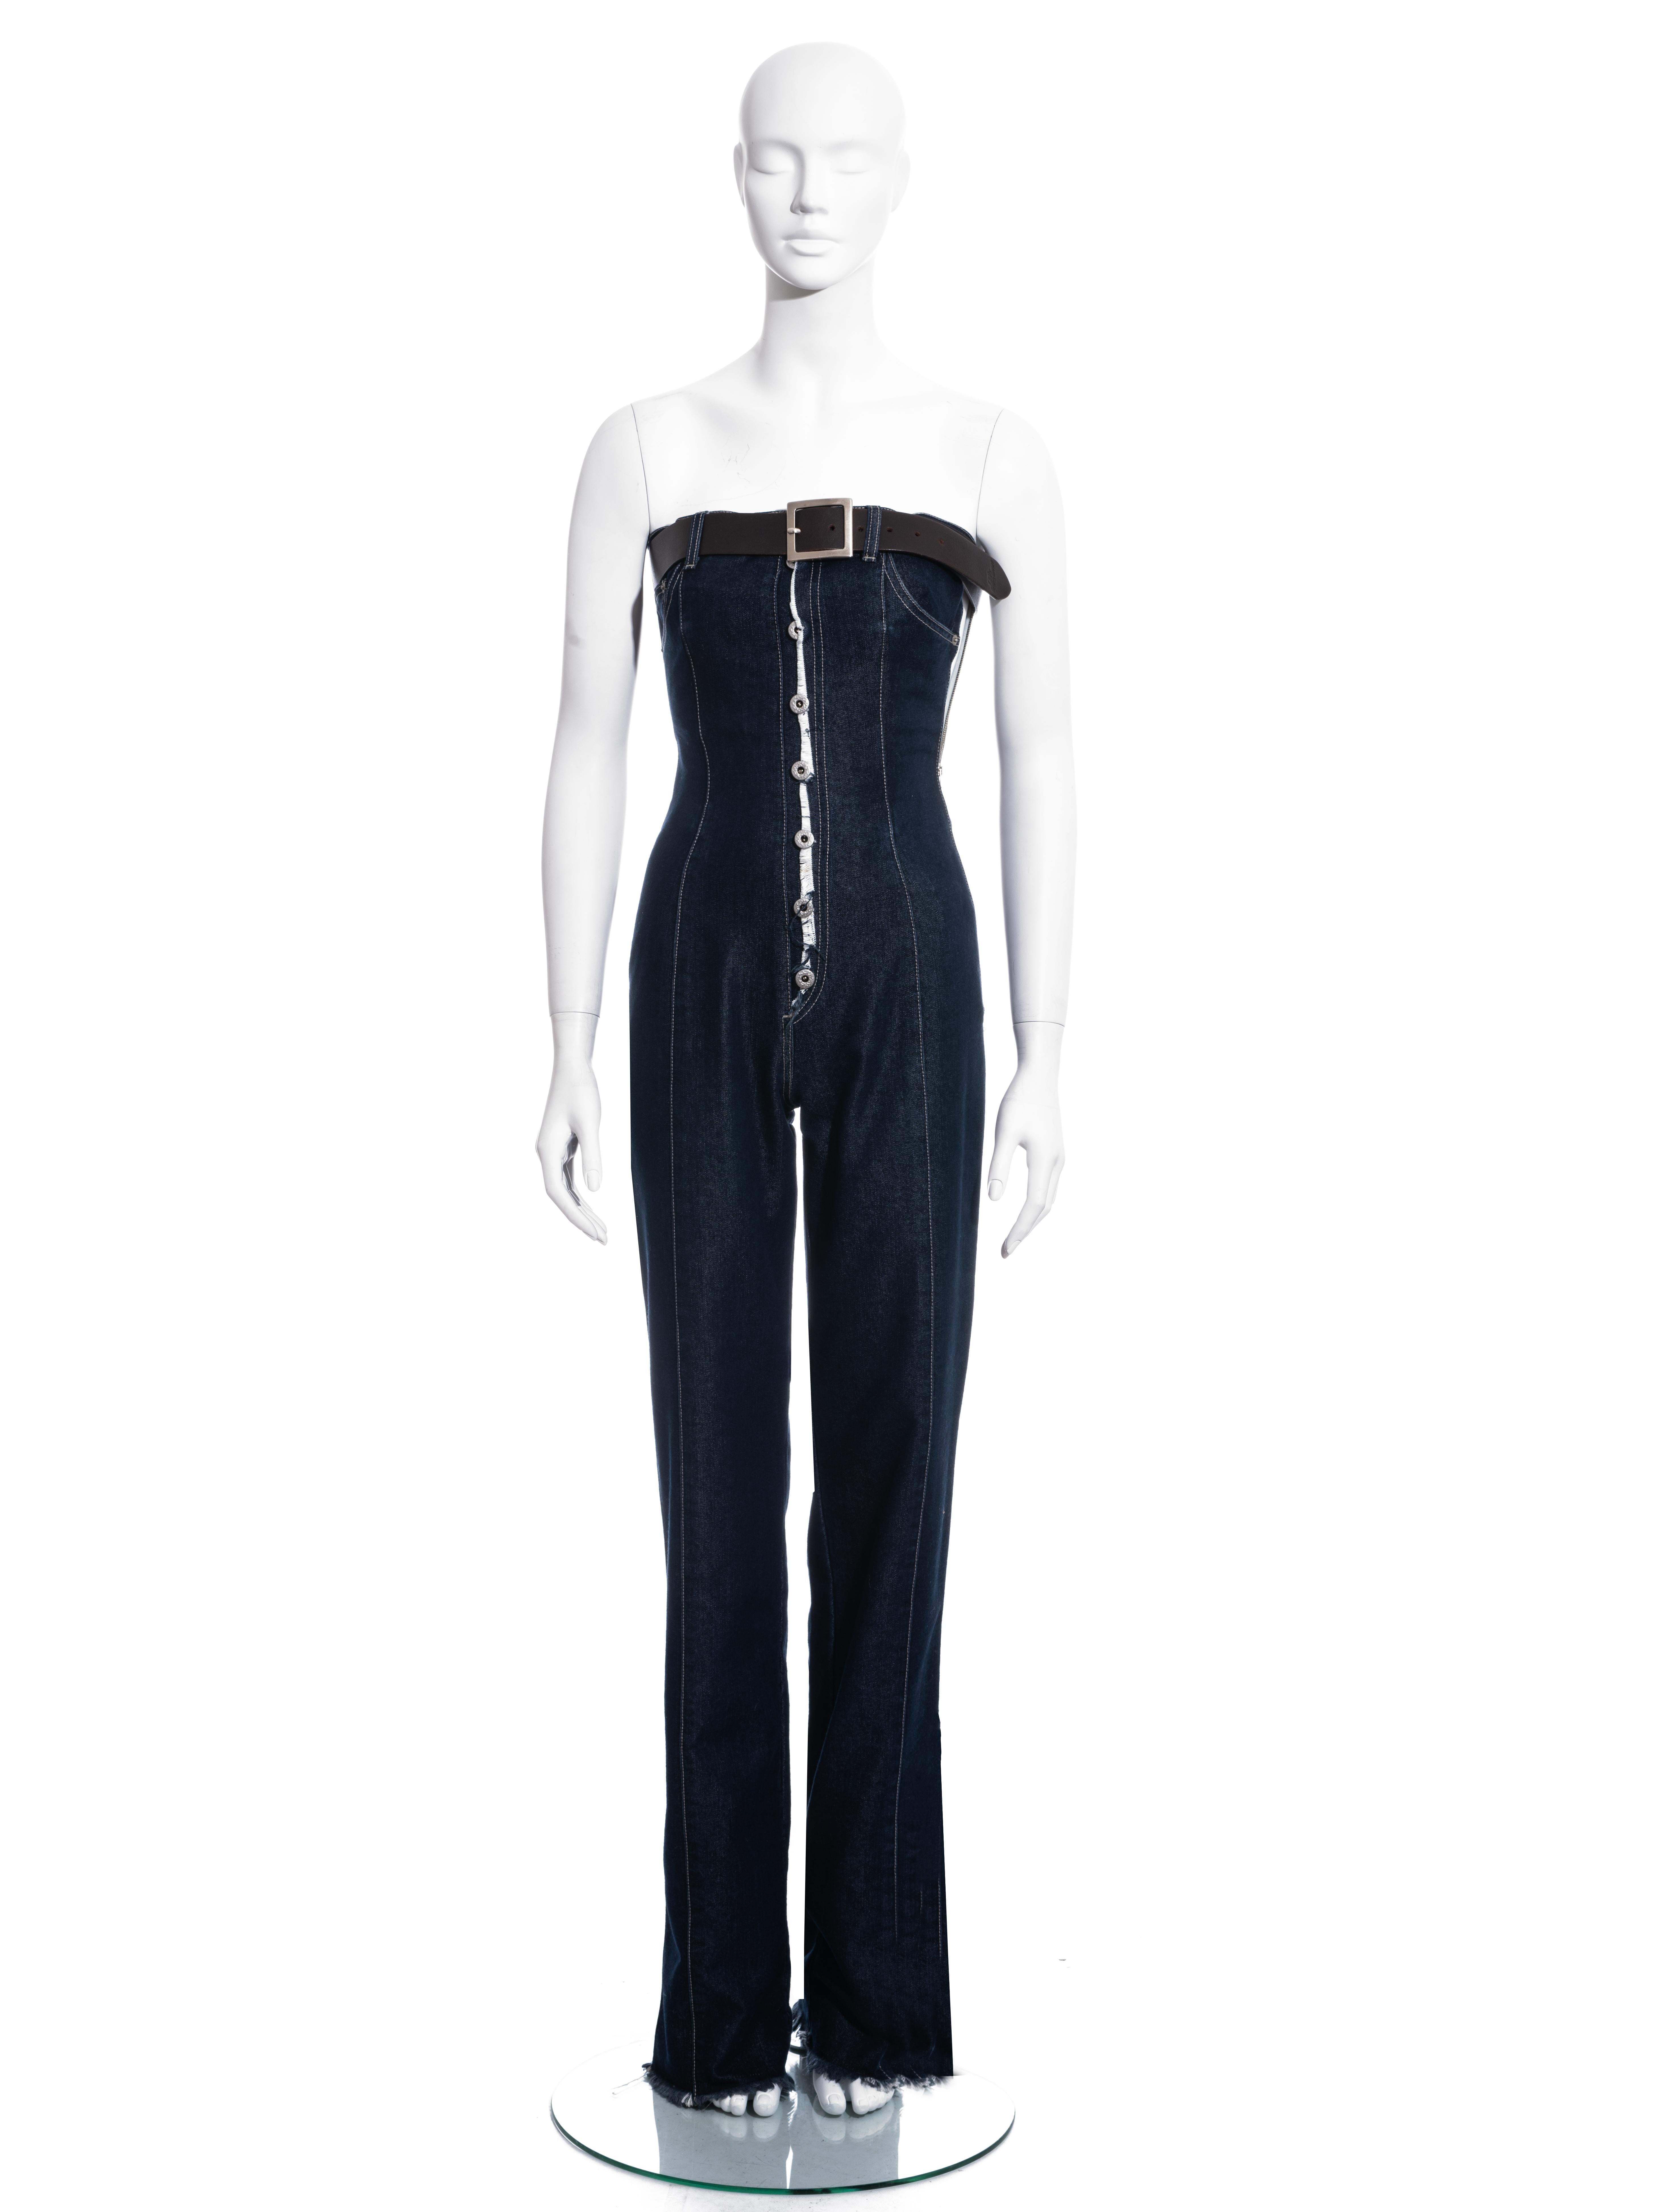 ▪ Alexander McQueen indigo denim corseted jumpsuit
▪ 64% Cotton, 36% Polyester
▪ Metal button and zip fastening 
▪ Brown leather belt with metal buckle 
▪ Straight leg
▪ Frayed edges 
▪ IT 40 - FR 36 - UK 8 - US 4
▪ Fall-Winter 1996